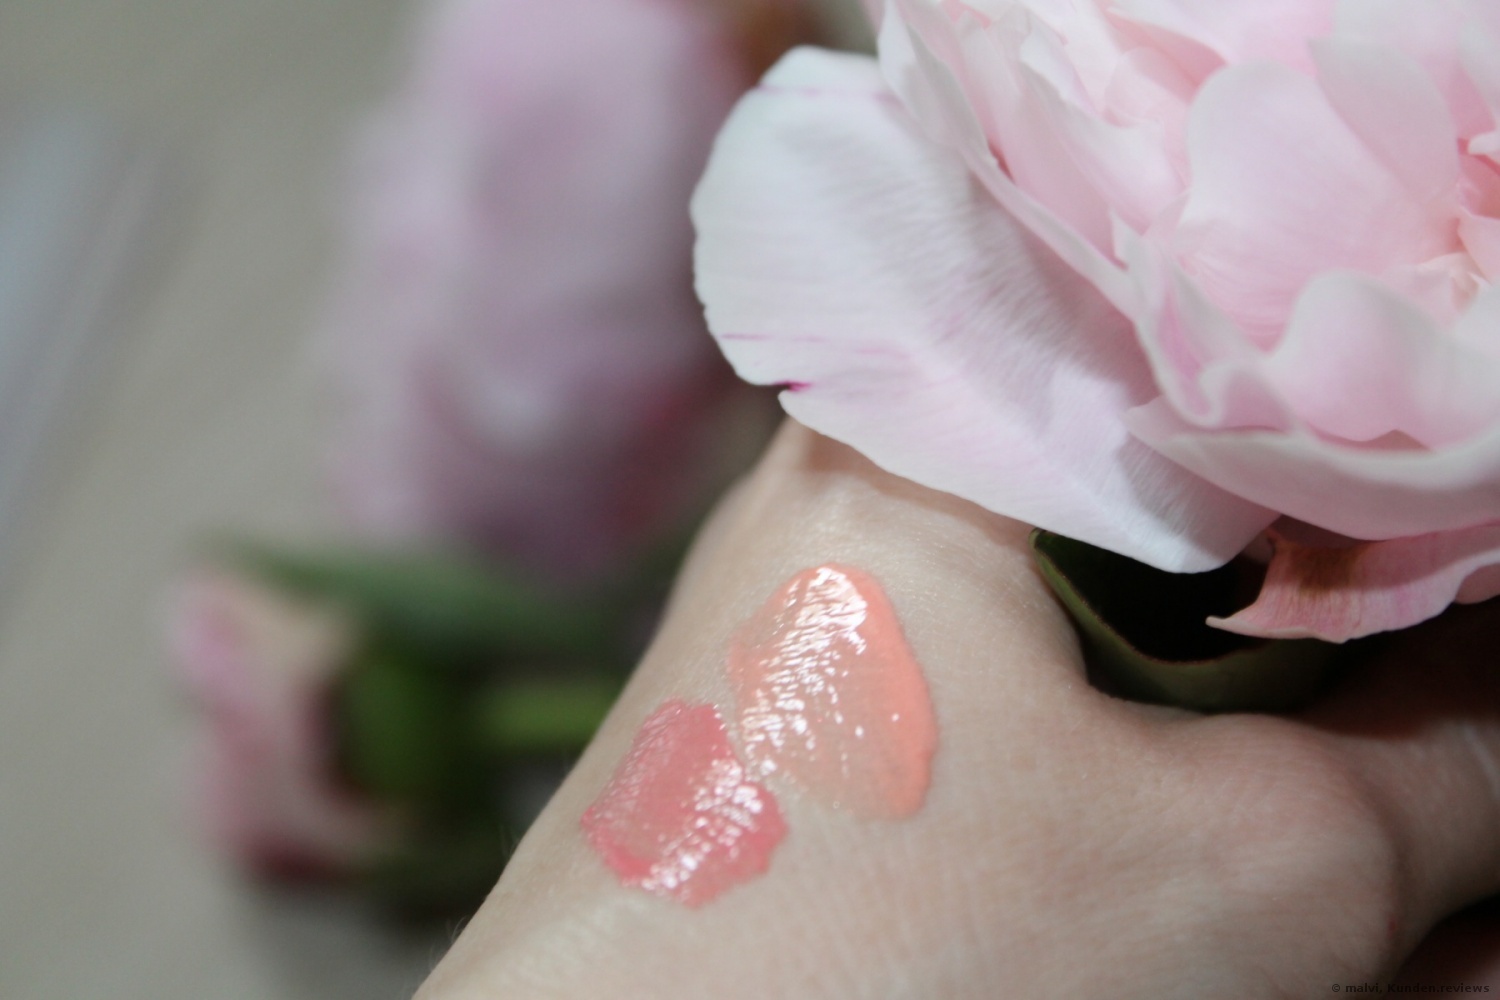 Catrice Beautifying Lip Smoother